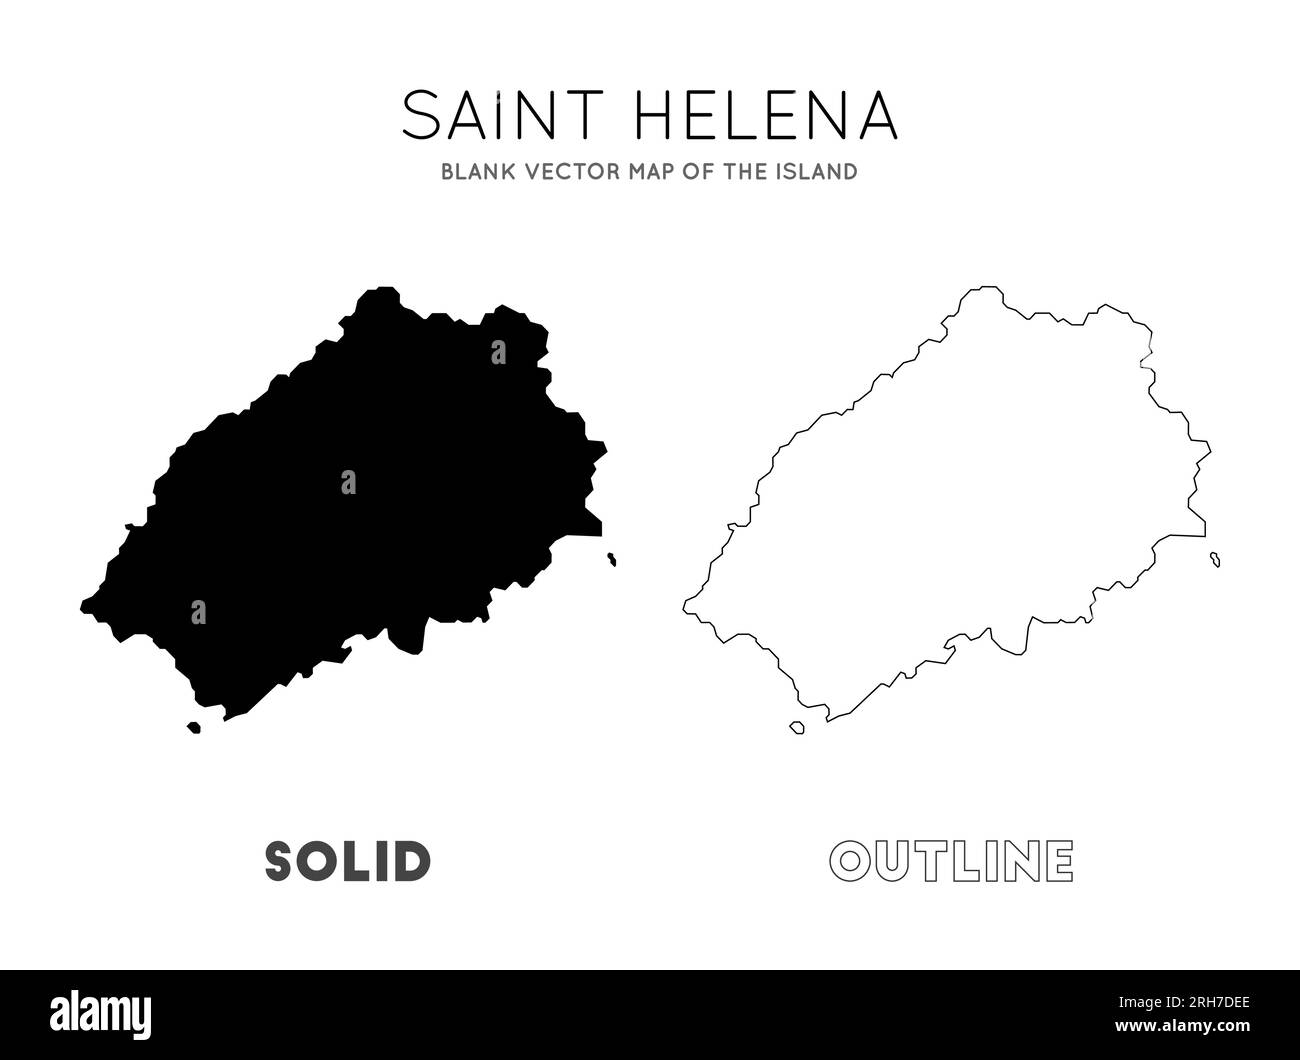 Saint Helena map. Blank vector map of the Island. Borders of Saint Helena for your infographic. Vector illustration. Stock Vector